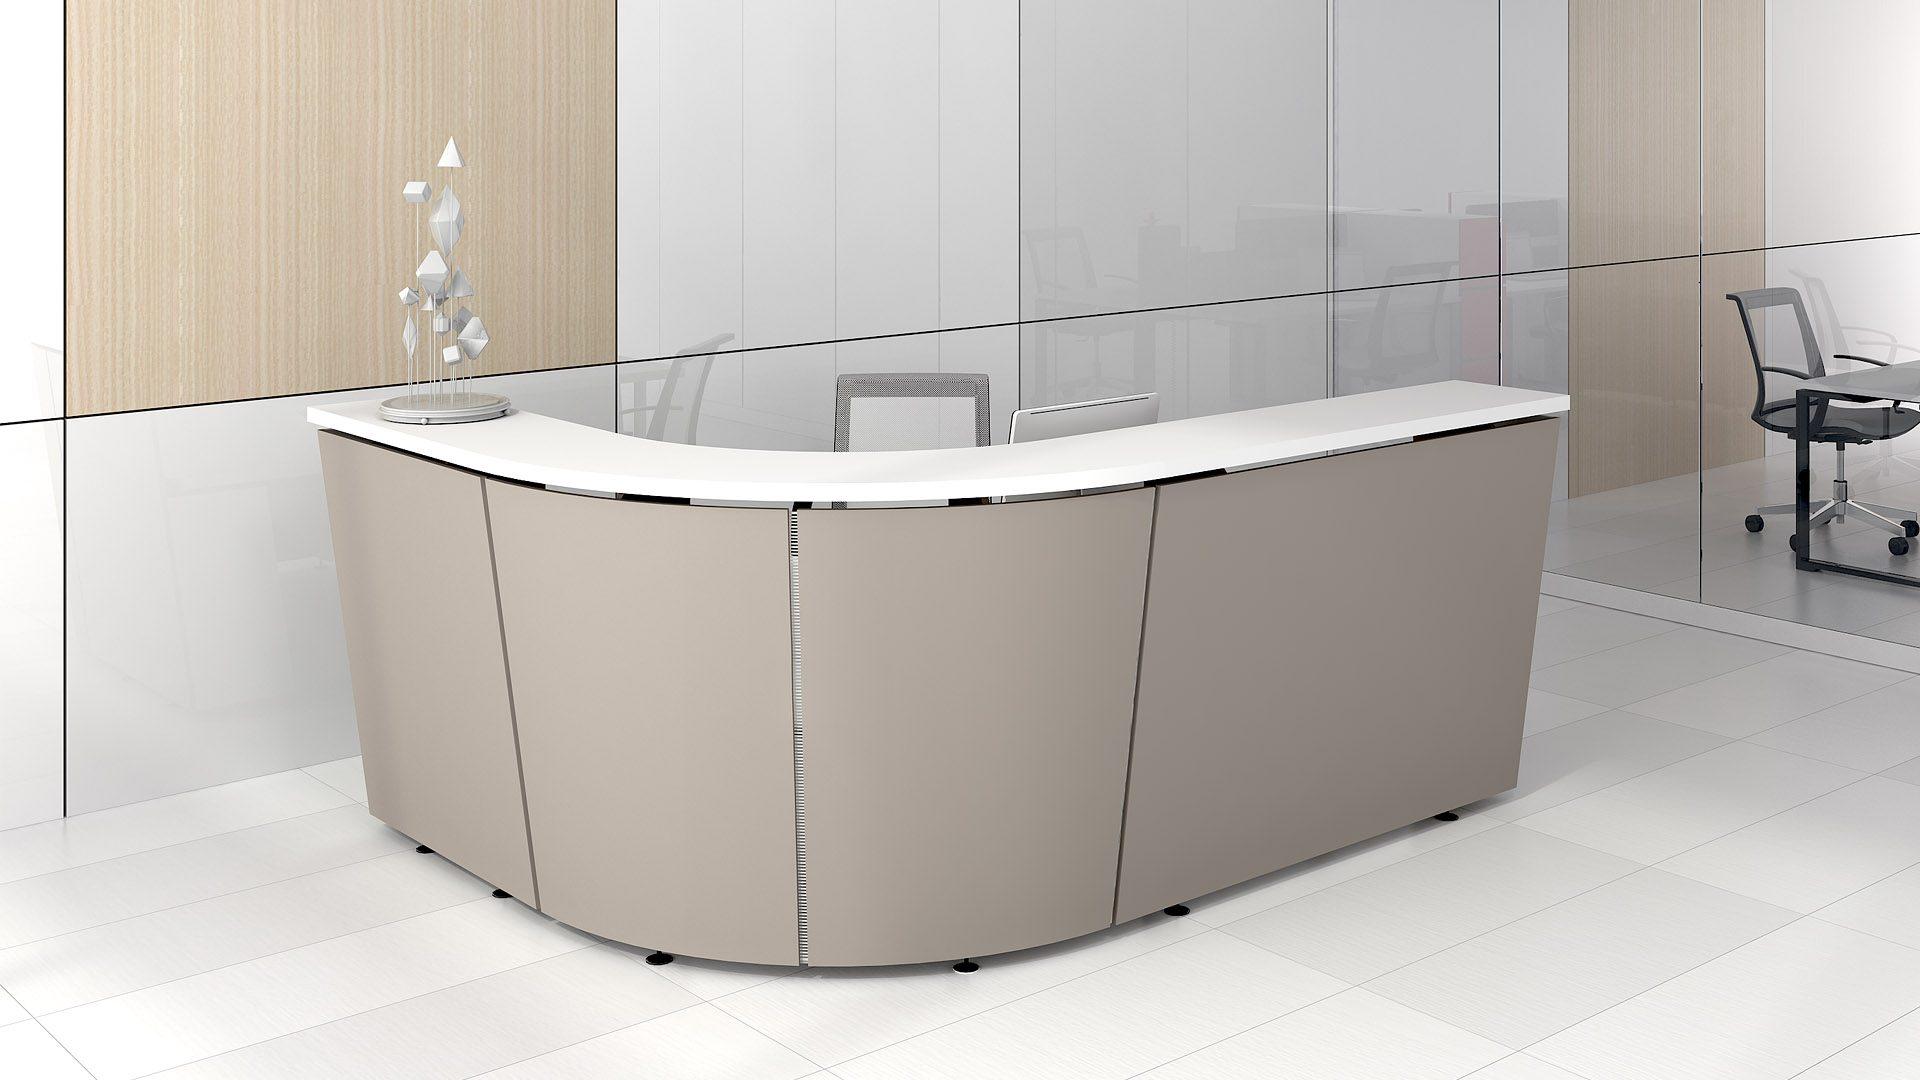 Tera Reception Counter with curved and straight sections